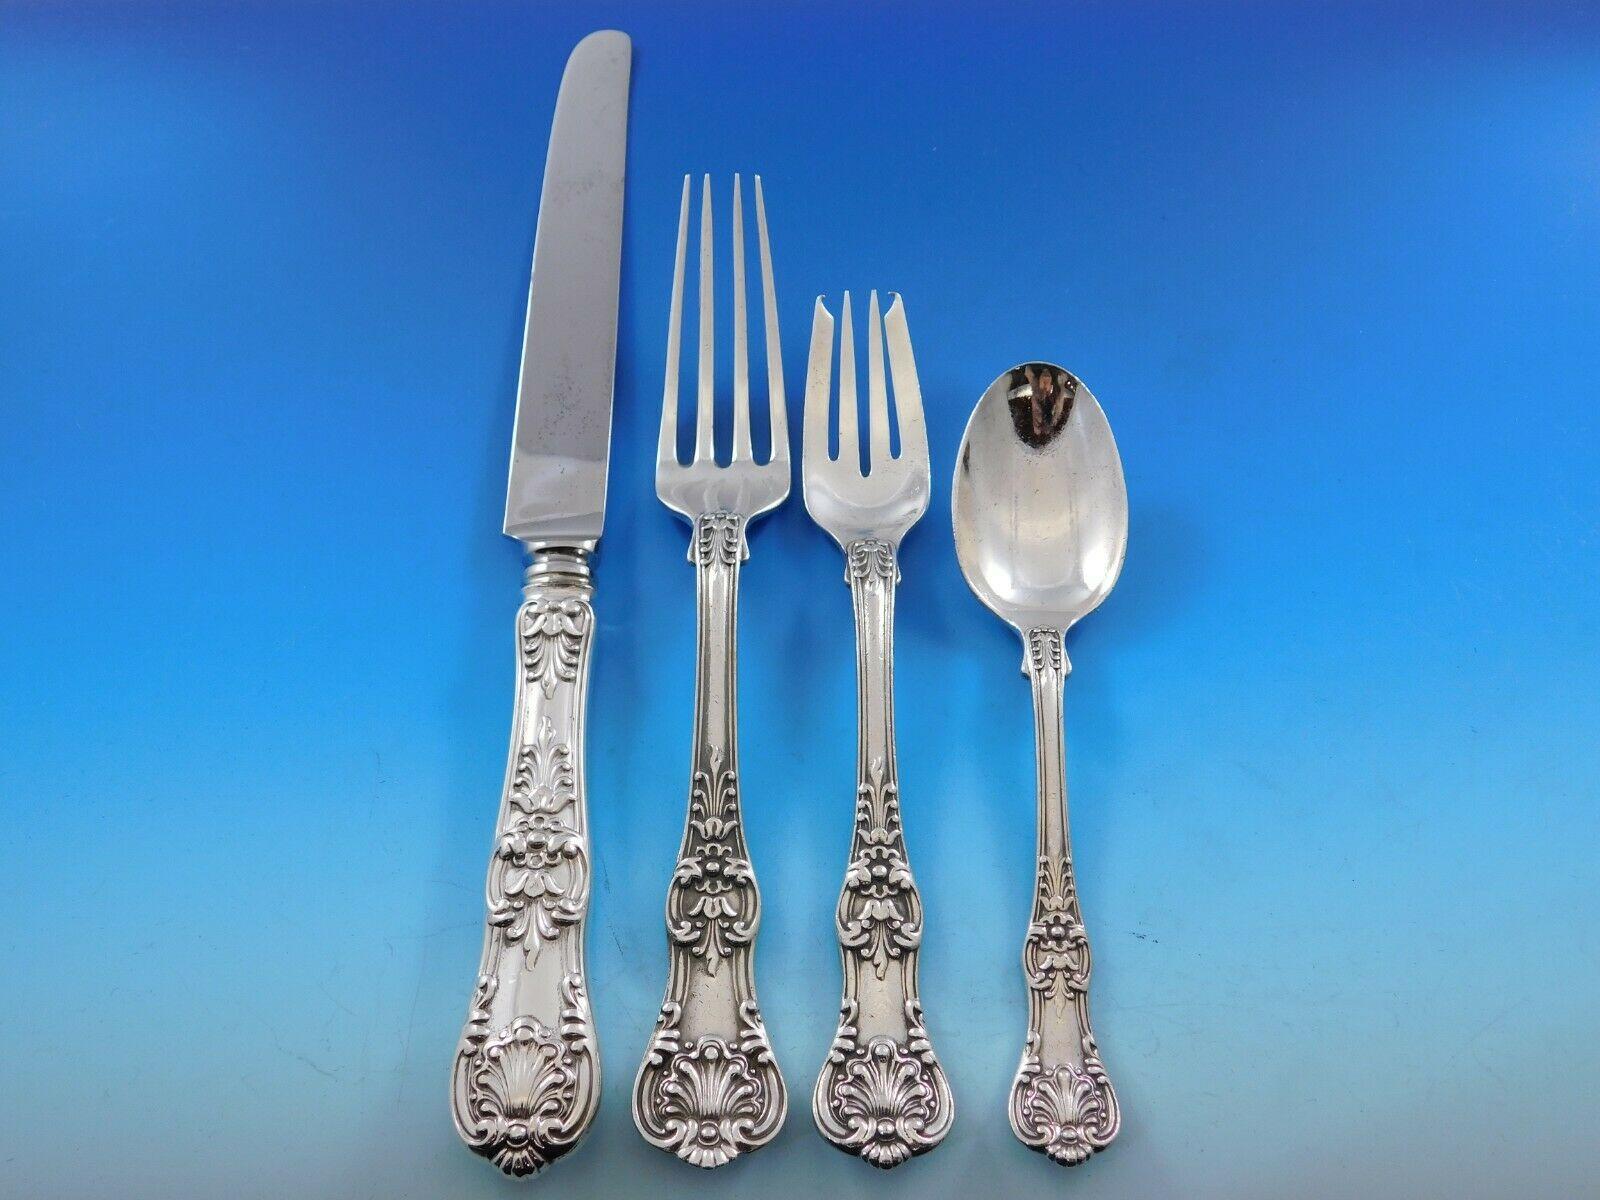 English King (c. 1885)

Patterns similar to our English King were first used in France and England late in the eighteenth century and have remained among the most popular styles for>flatware today, in both Europe and America. Tiffany & Co. first